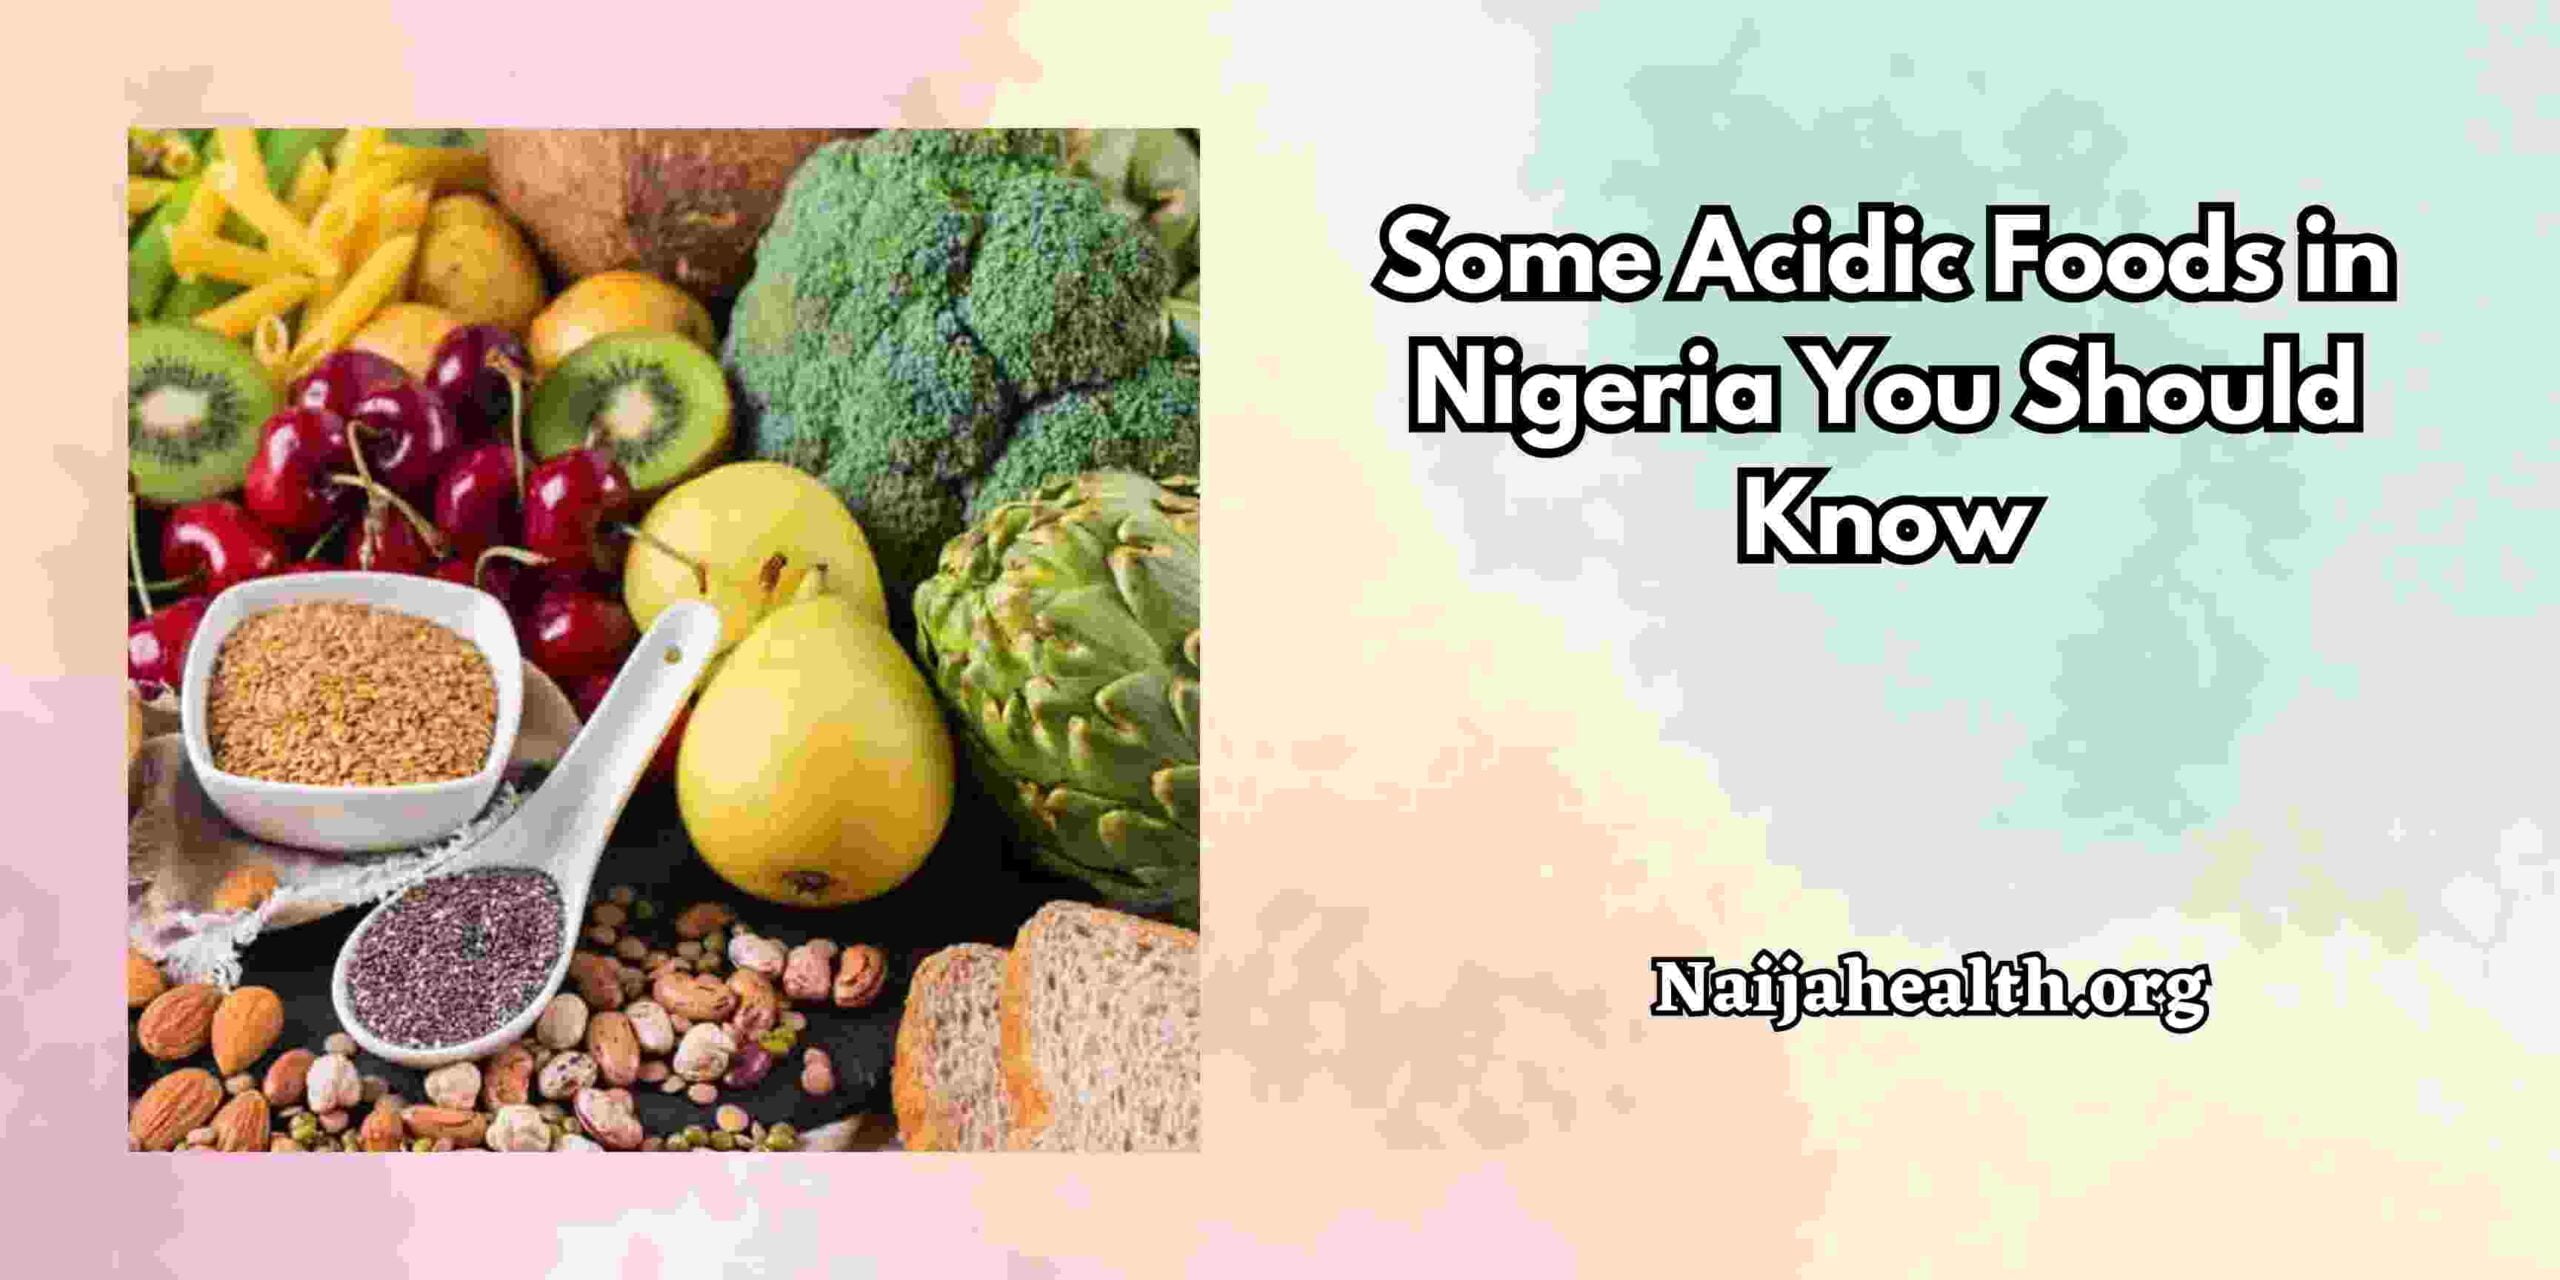 Some Acidic Foods in Nigeria You Should Know